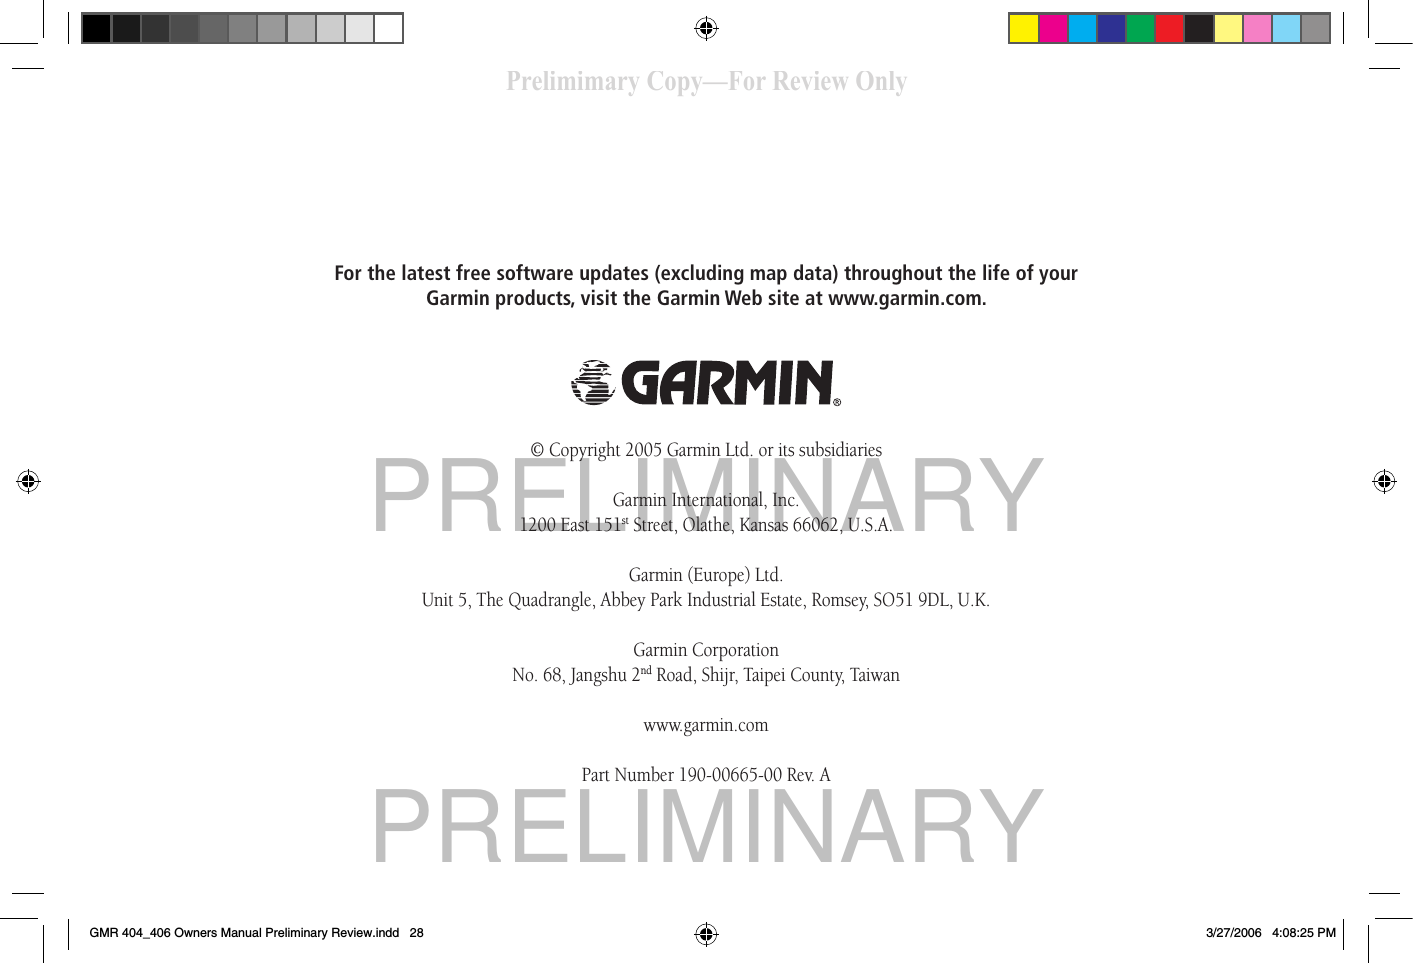 PRELIMINARYPRELIMINARYFor the latest free software updates (excluding map data) throughout the life of your Garmin products, visit the Garmin Web site at www.garmin.com.© Copyright 2005 Garmin Ltd. or its subsidiariesGarmin International, Inc.1200 East 151st Street, Olathe, Kansas 66062, U.S.A.Garmin (Europe) Ltd.Unit 5, The Quadrangle, Abbey Park Industrial Estate, Romsey, SO51 9DL, U.K.Garmin CorporationNo. 68, Jangshu 2nd Road, Shijr, Taipei County, Taiwanwww.garmin.comPart Number 190-00665-00 Rev. APrelimimary Copy—For Review OnlyGMR 404_406 Owners Manual Preliminary Review.indd   28 3/27/2006   4:08:25 PM